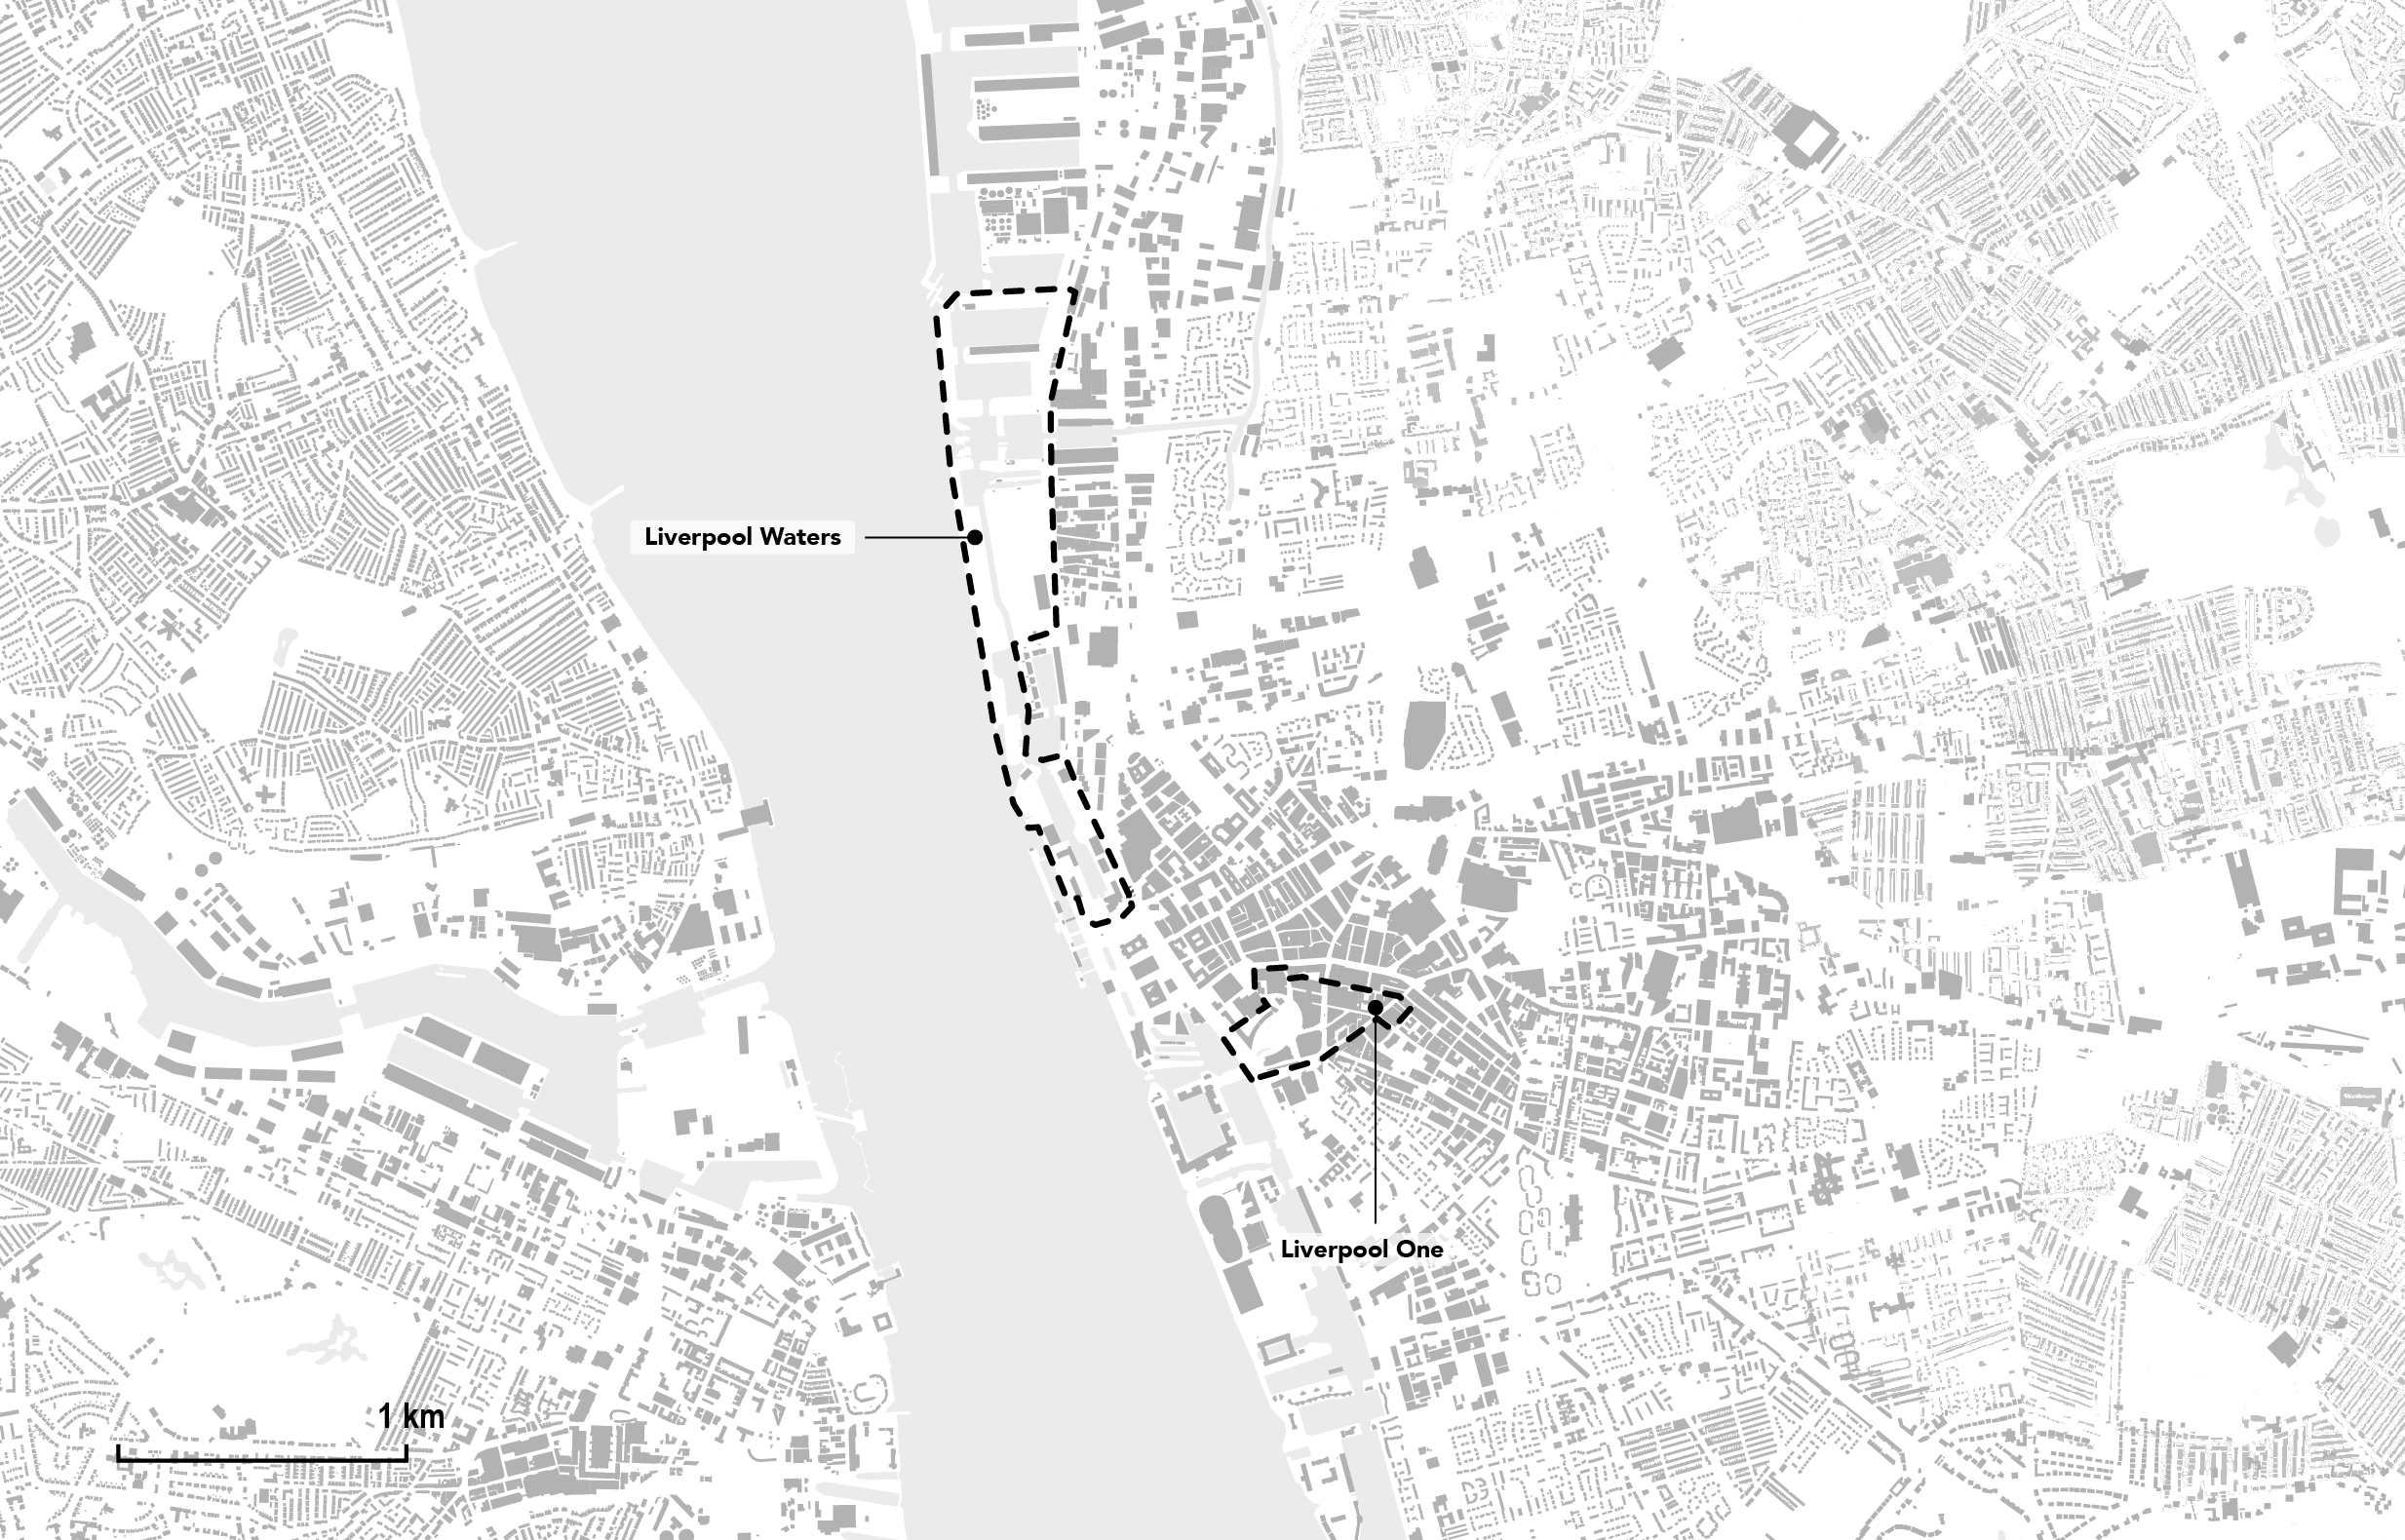 Map showing the boundaries of the Liverpool One and the Liverpool Waters developments (source: author).